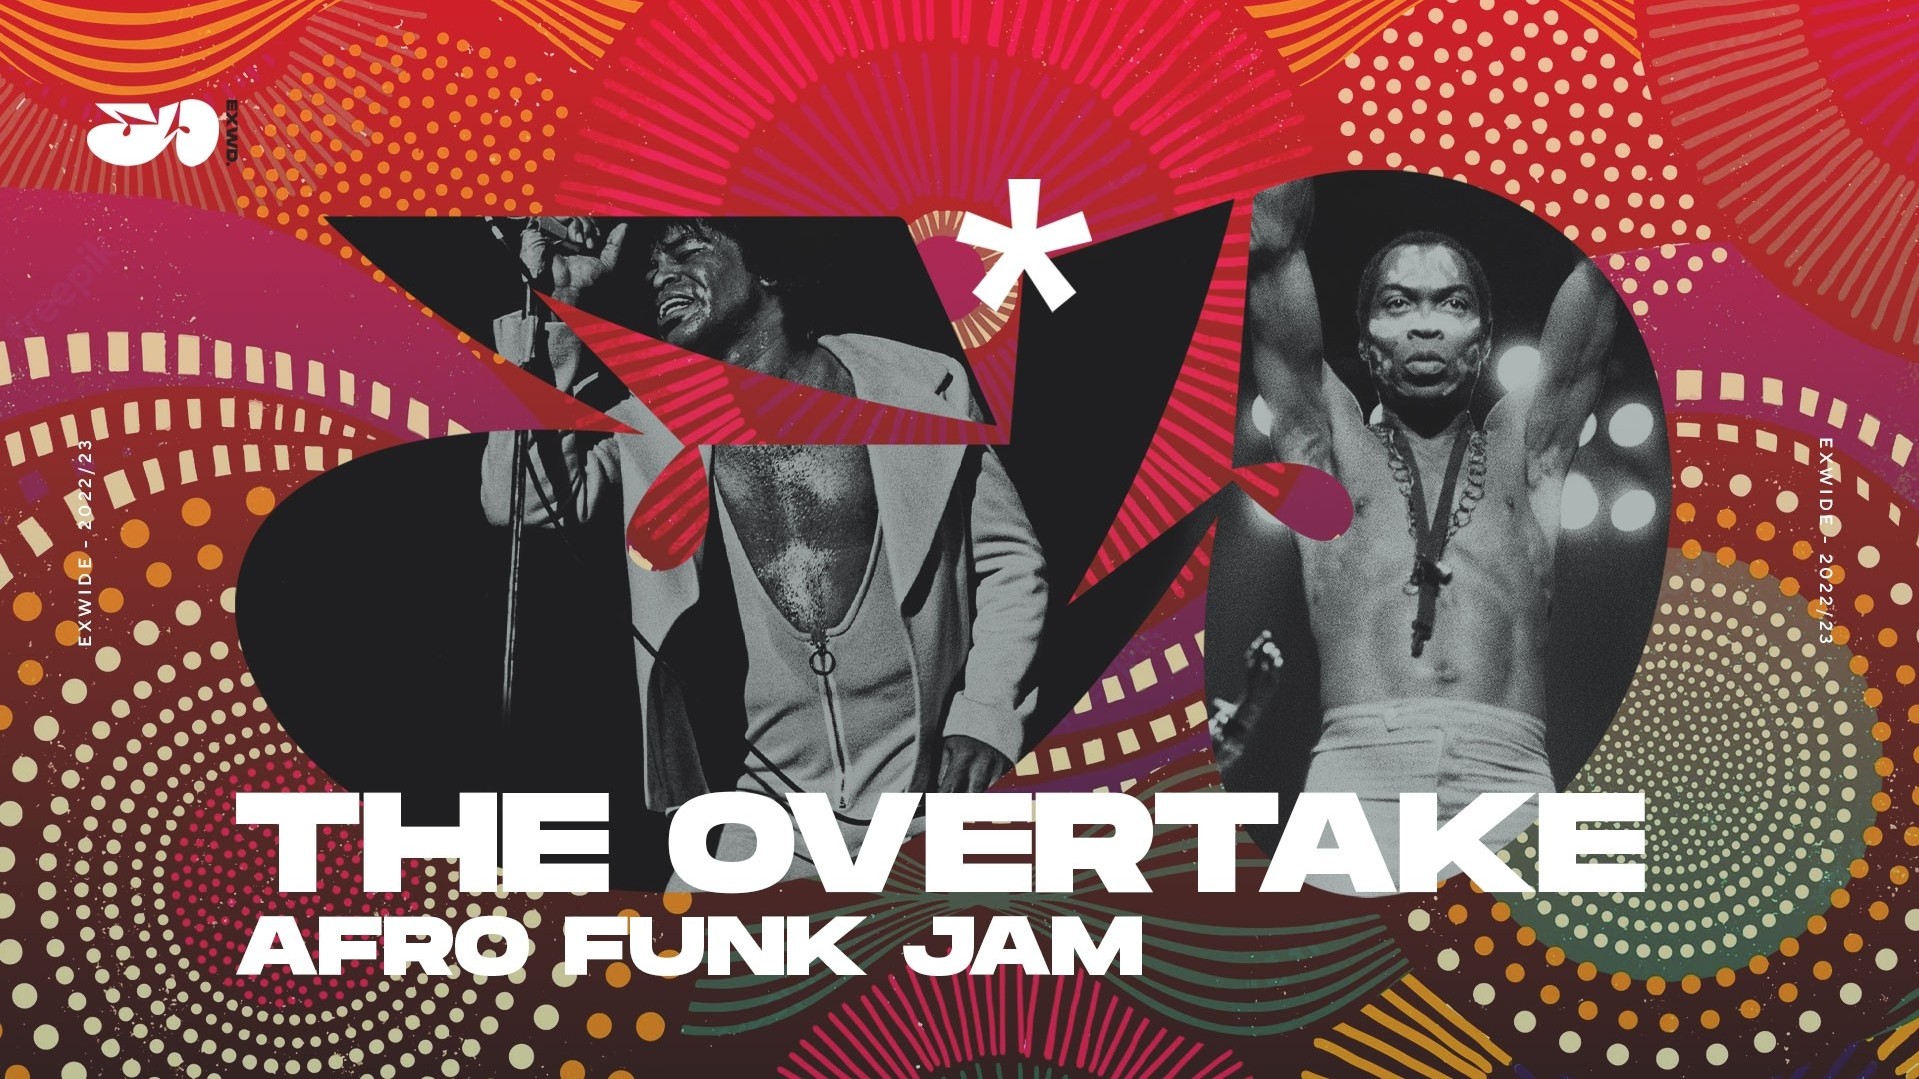 The Overtake Afro-funk Jam